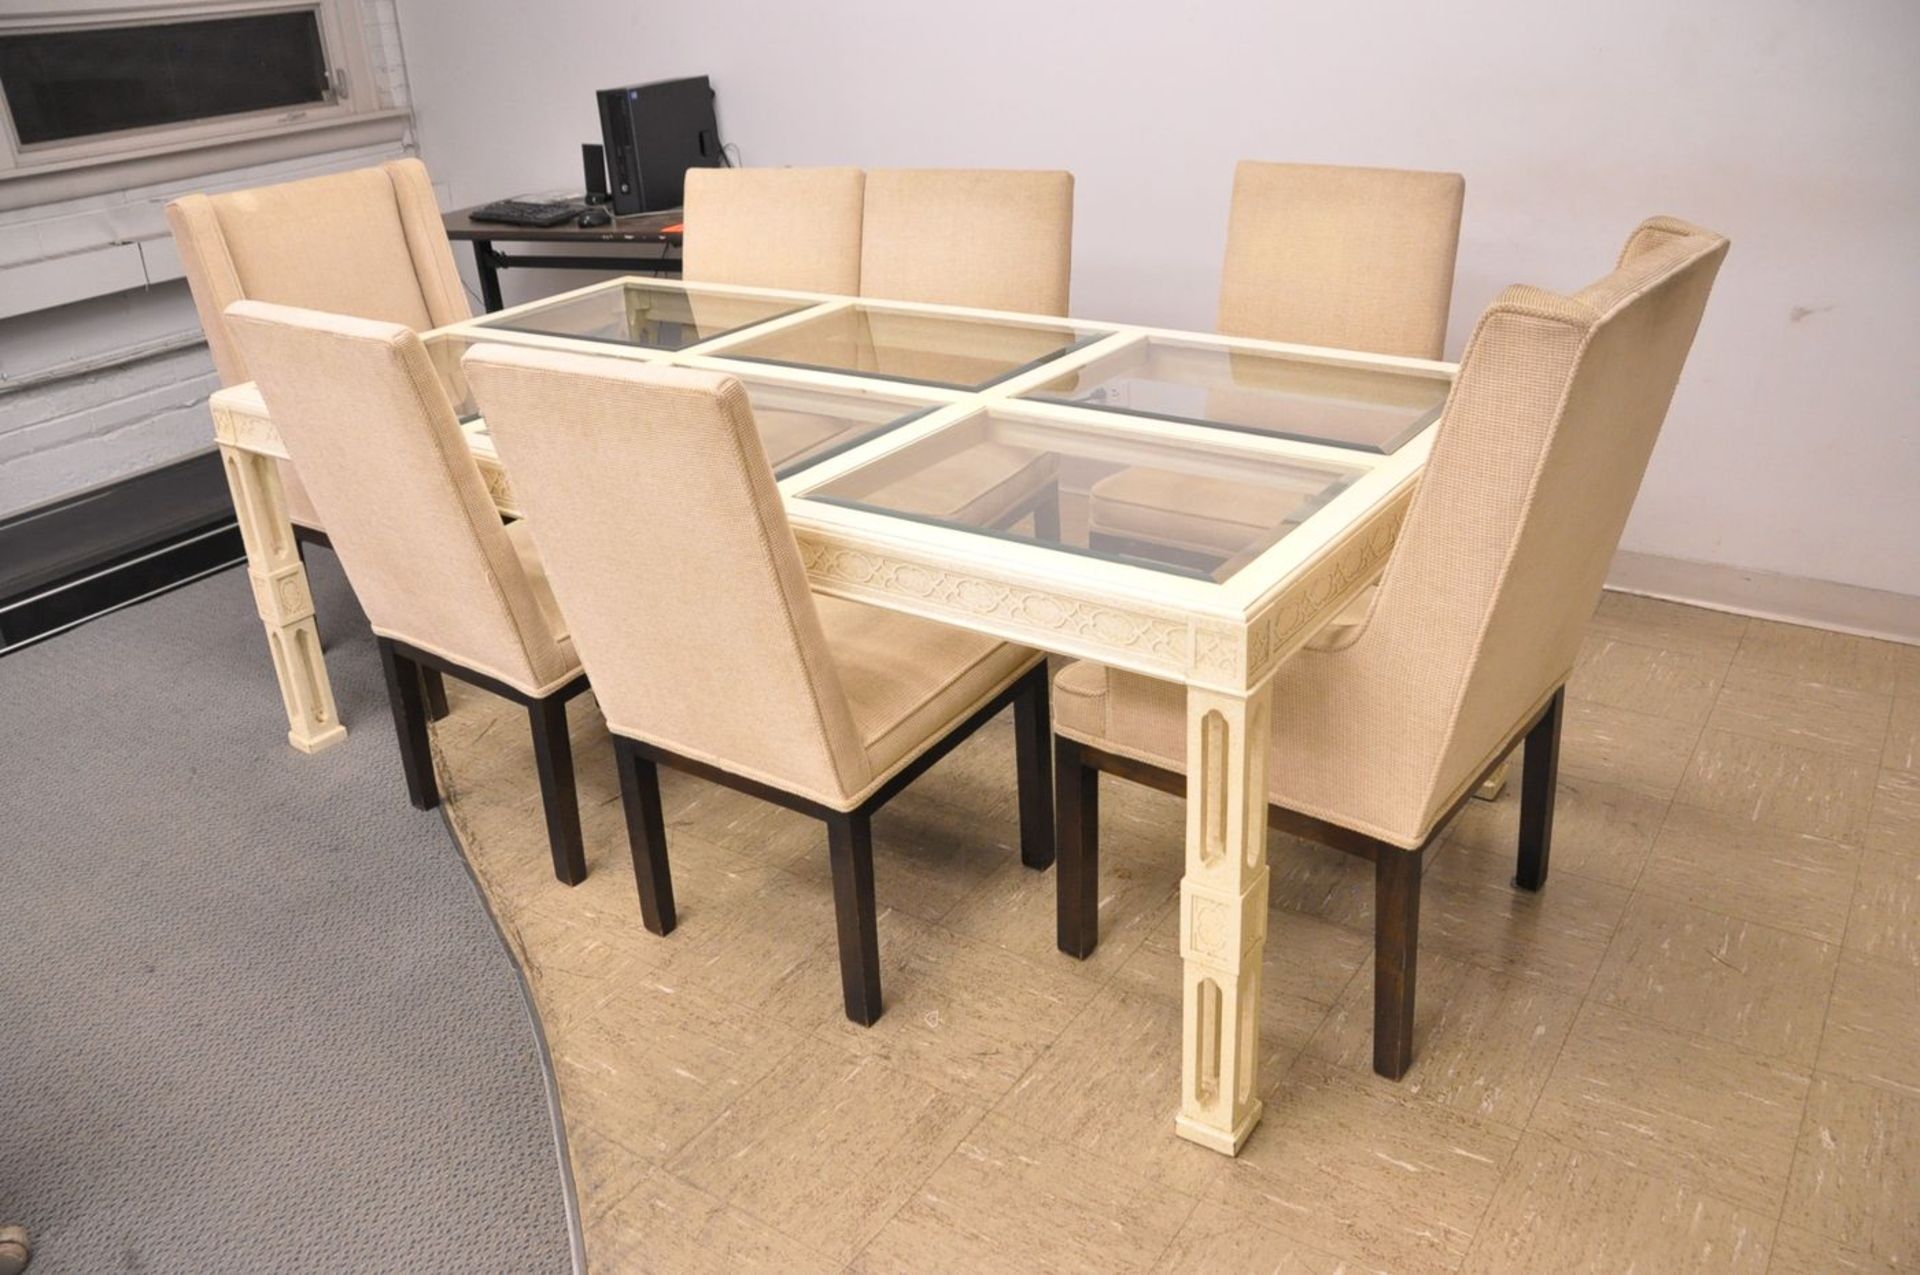 42 in. x 82 in. Glass Table with (7) Chairs (Removal Cost : N/C)